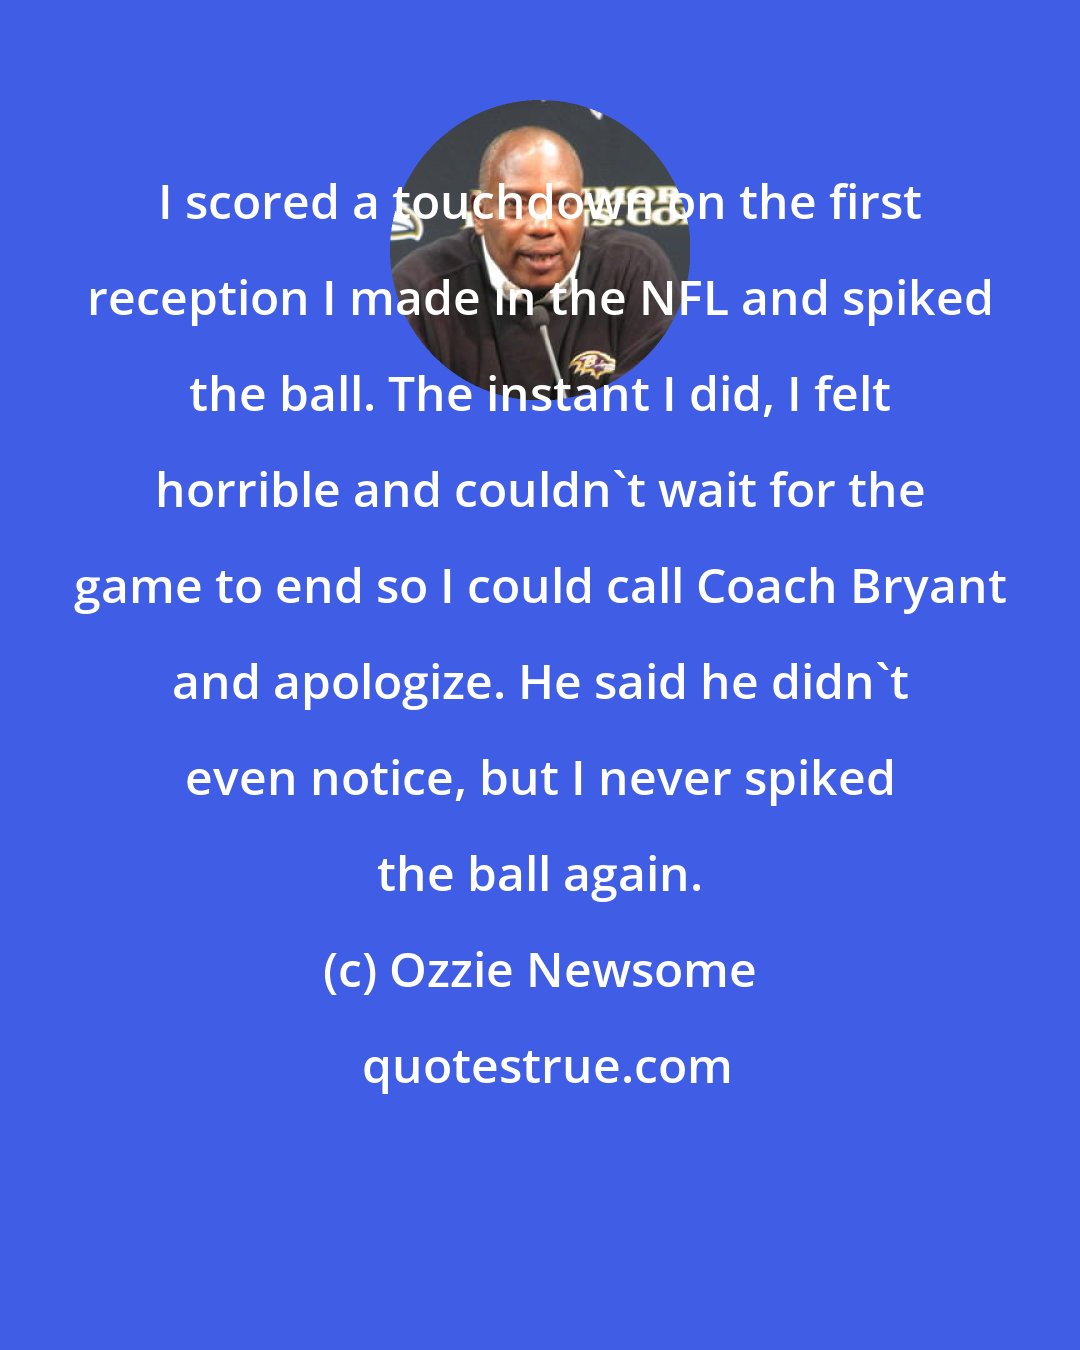 Ozzie Newsome: I scored a touchdown on the first reception I made in the NFL and spiked the ball. The instant I did, I felt horrible and couldn't wait for the game to end so I could call Coach Bryant and apologize. He said he didn't even notice, but I never spiked the ball again.